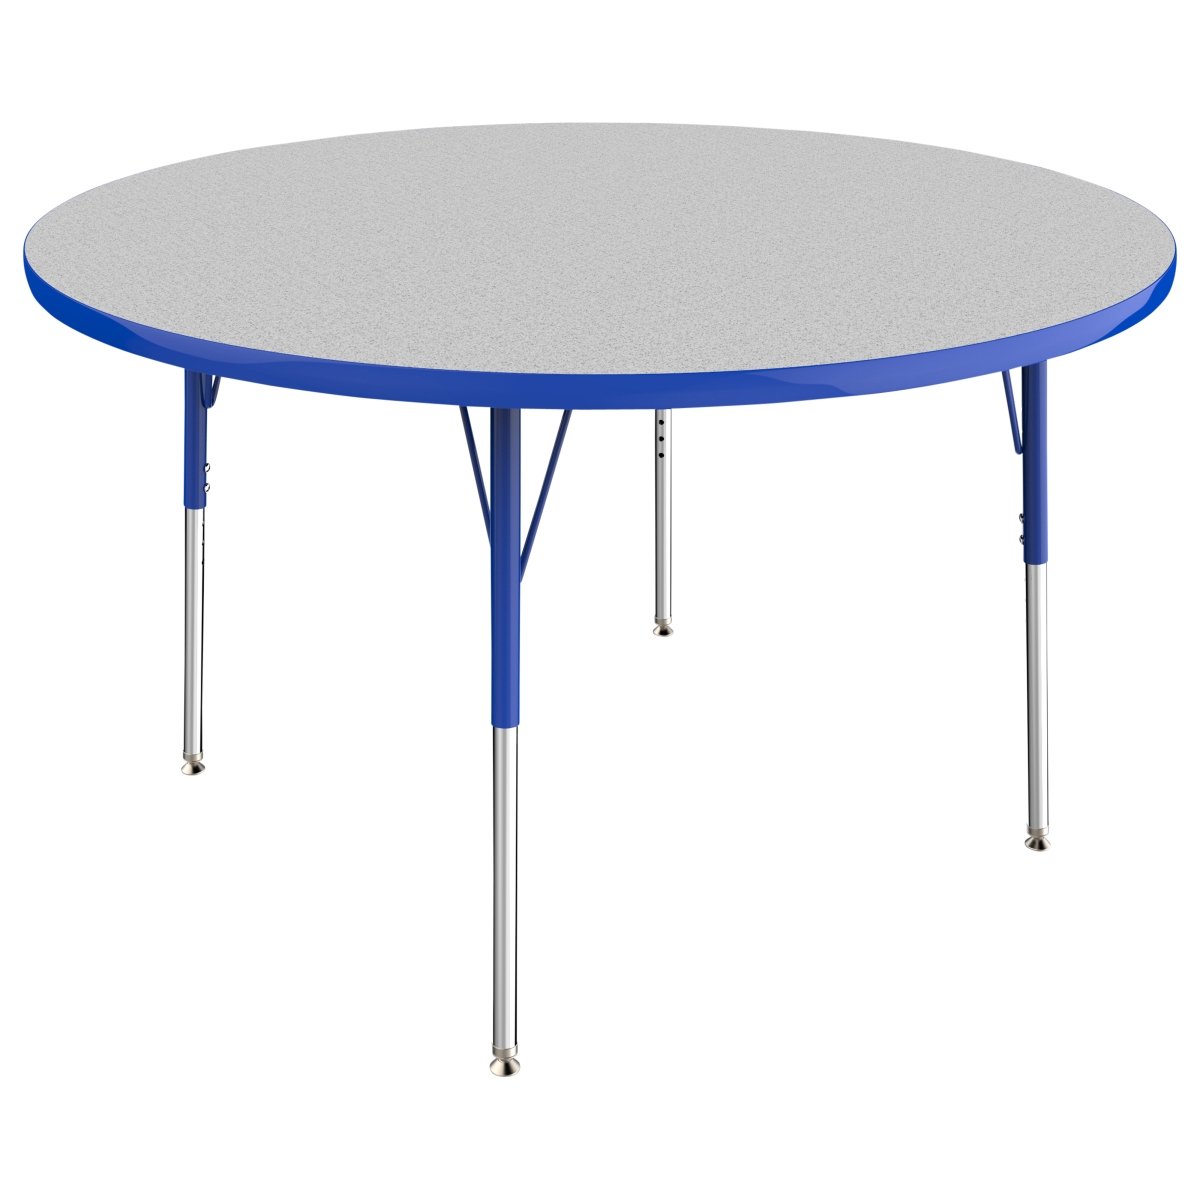 10043-gybl 48 In. Round T-mold Adjustable Activity Table With Standard Swivel - Grey & Blue